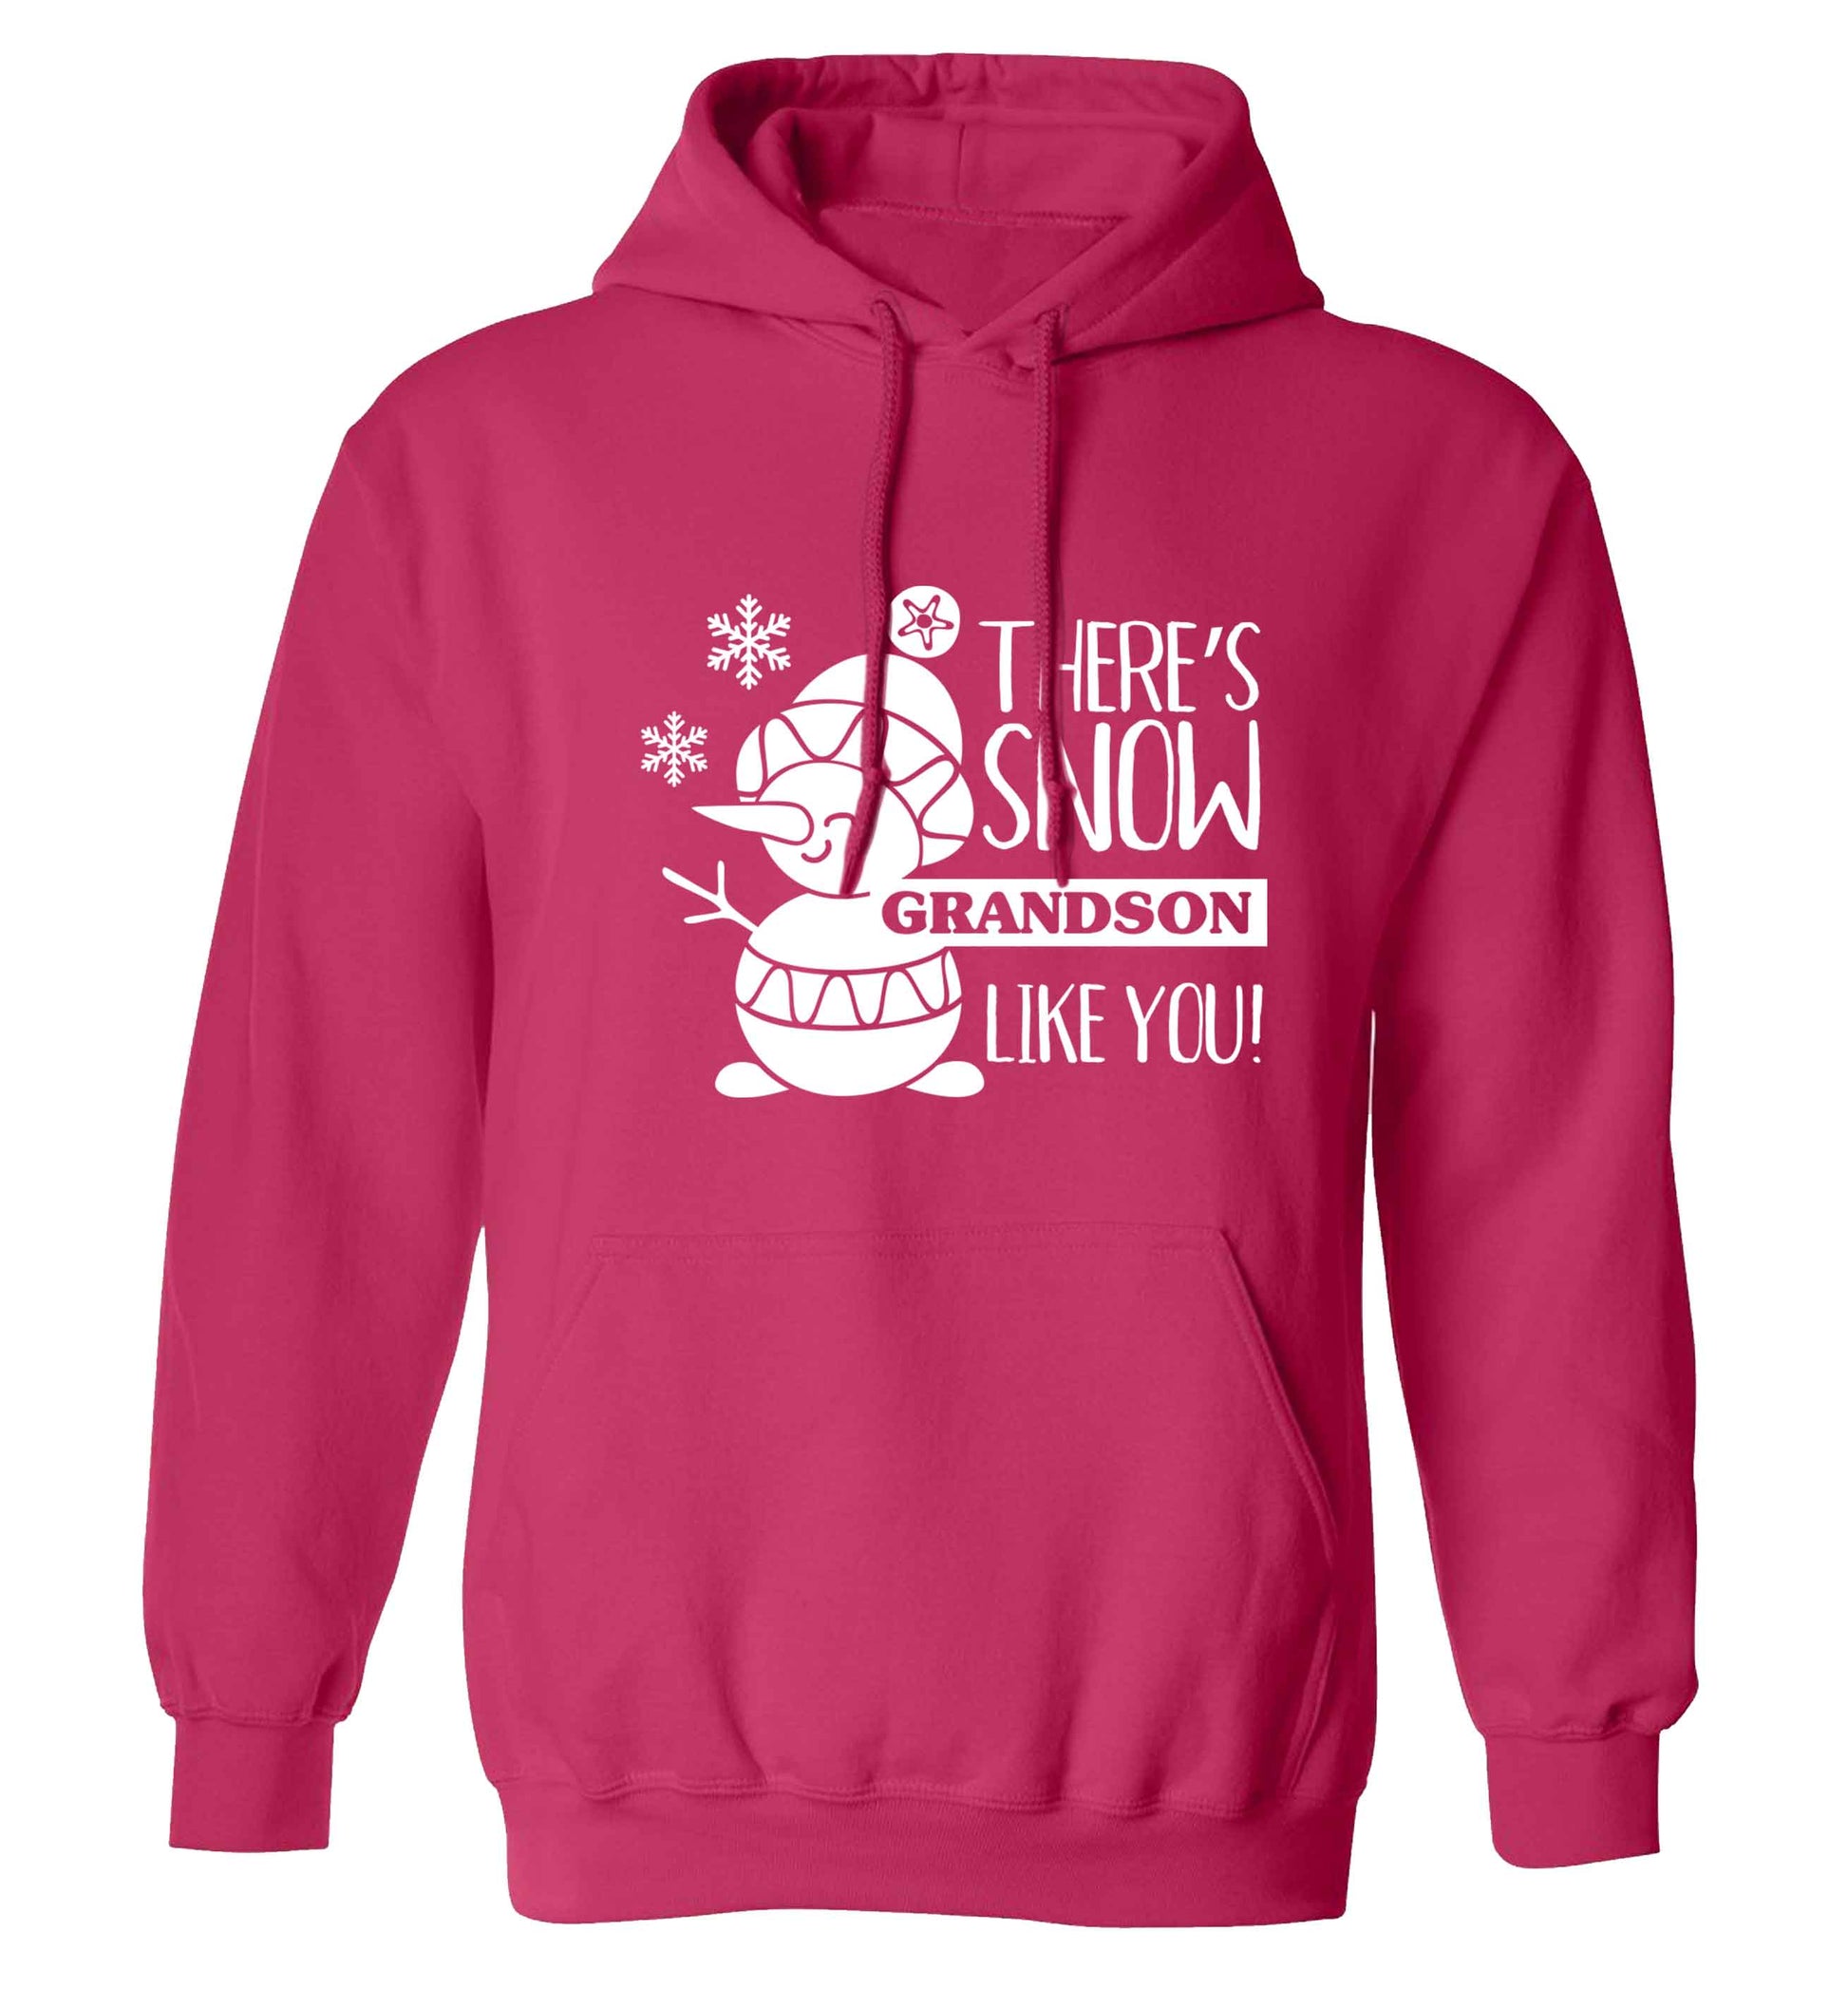 There's snow grandson like you adults unisex pink hoodie 2XL